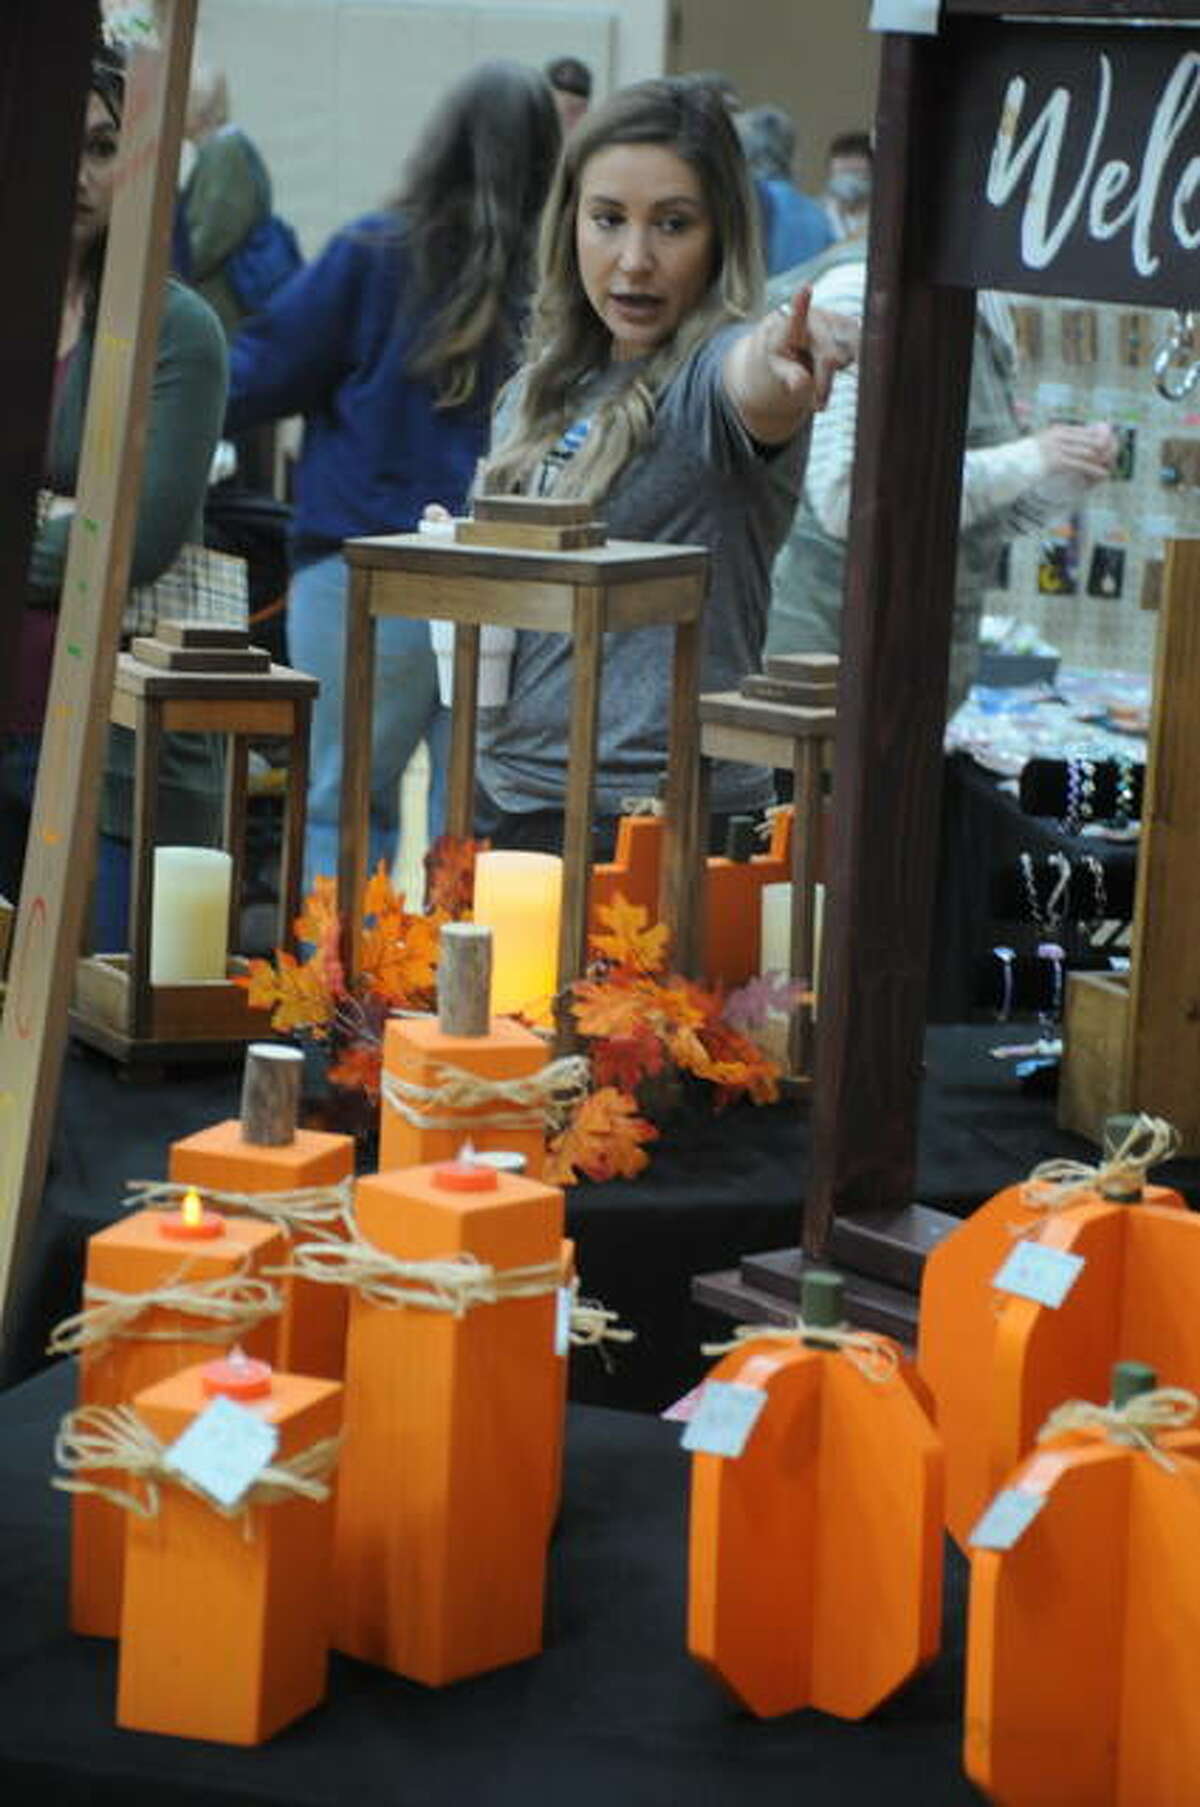 Emily Clay points to an item during Saturday’s Jerseyville Craft Fair.